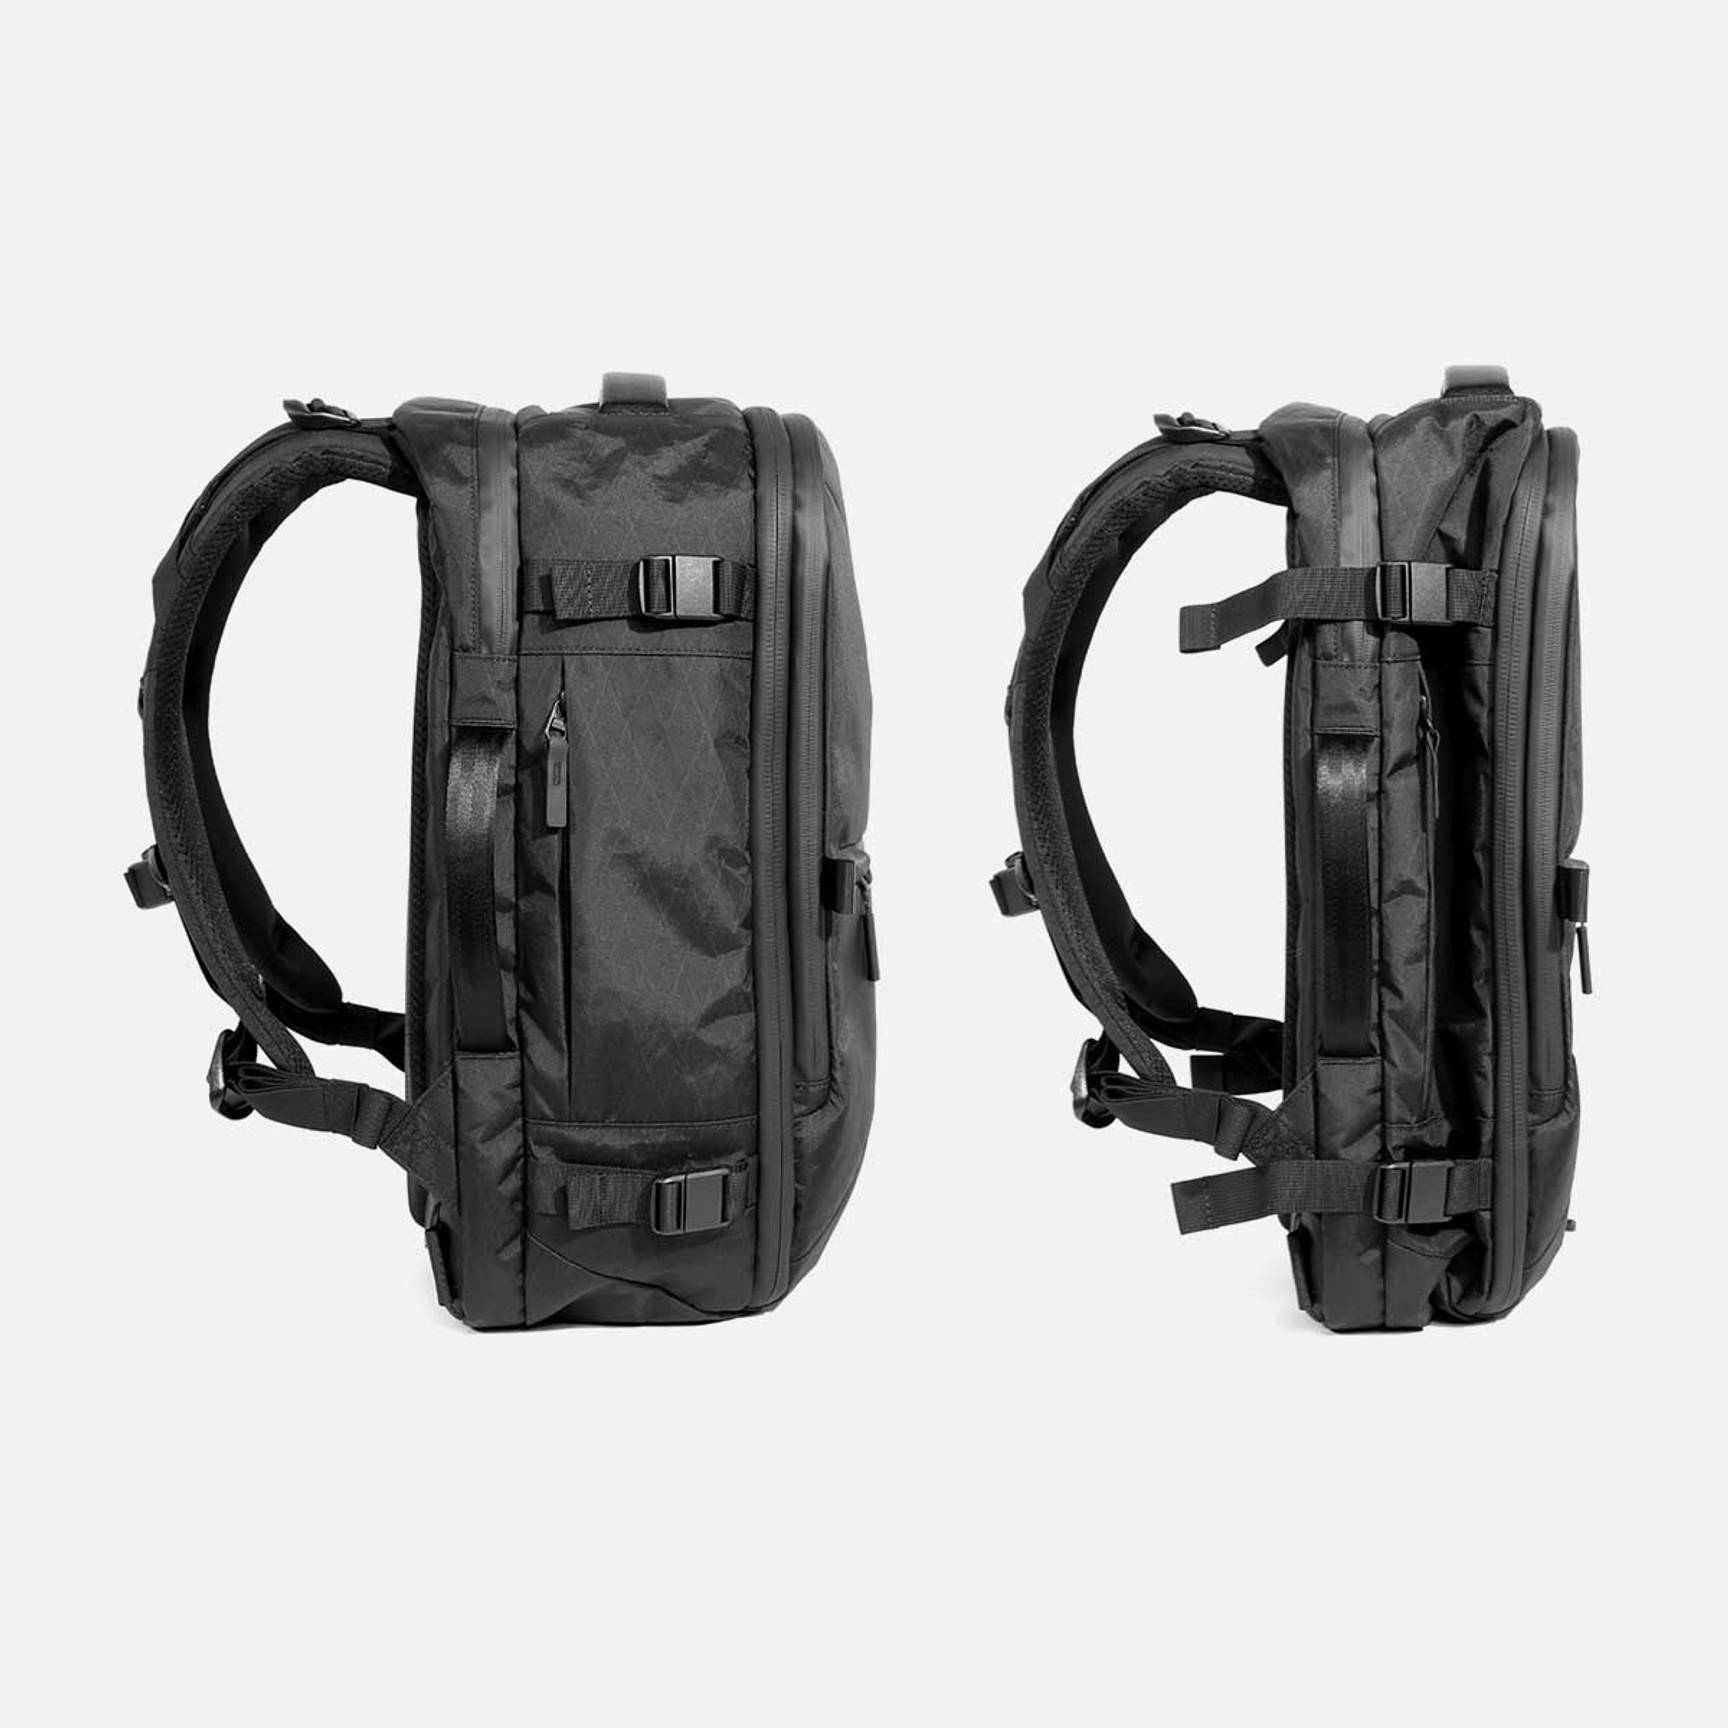 Aer Travel Pack 3 Small X-Pac